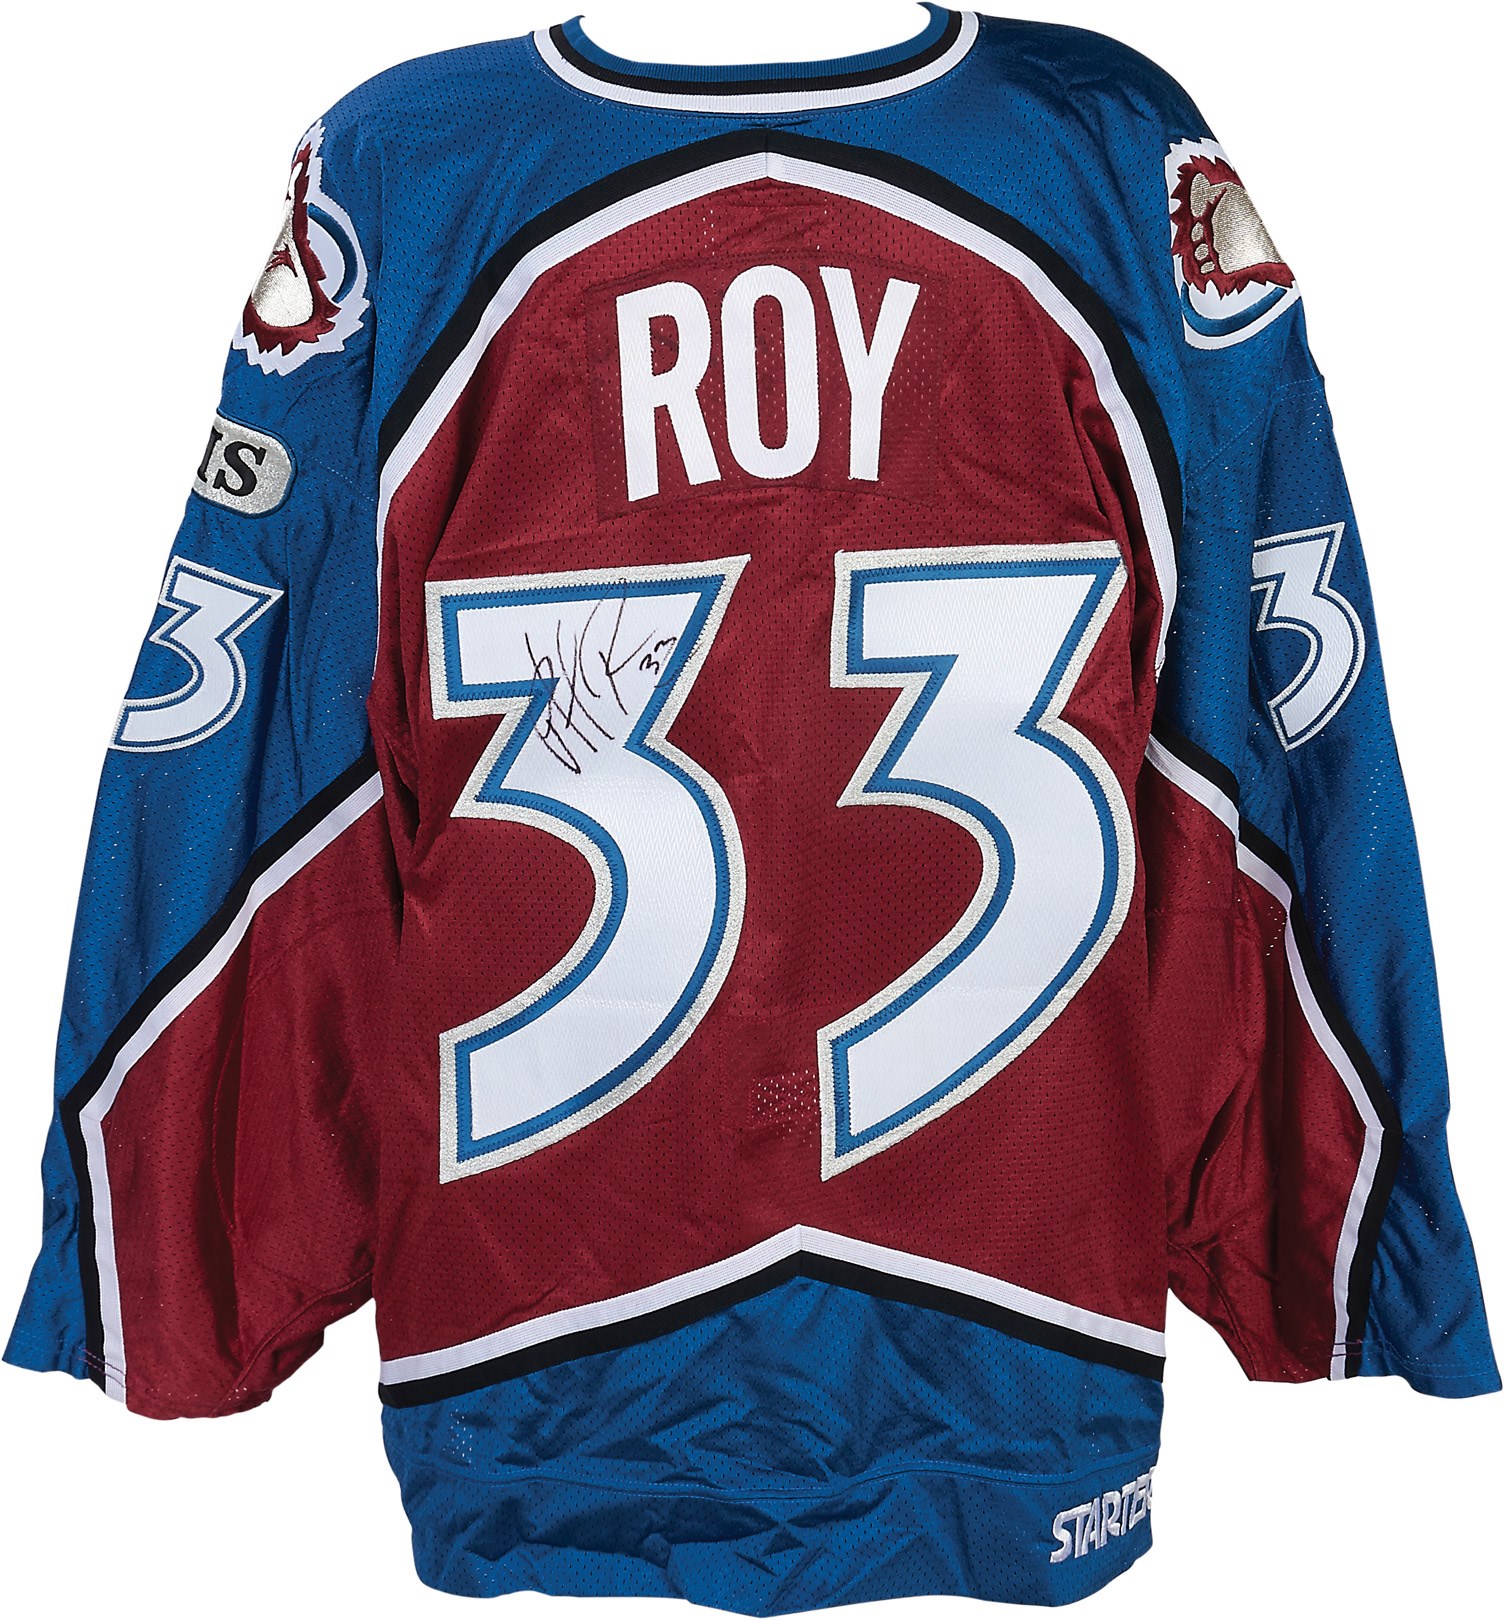 - 1998-99 Patrick Roy Colorado Avalanche Playoff Game Worn Jersey (Photo-Matched, MeiGray LOA)